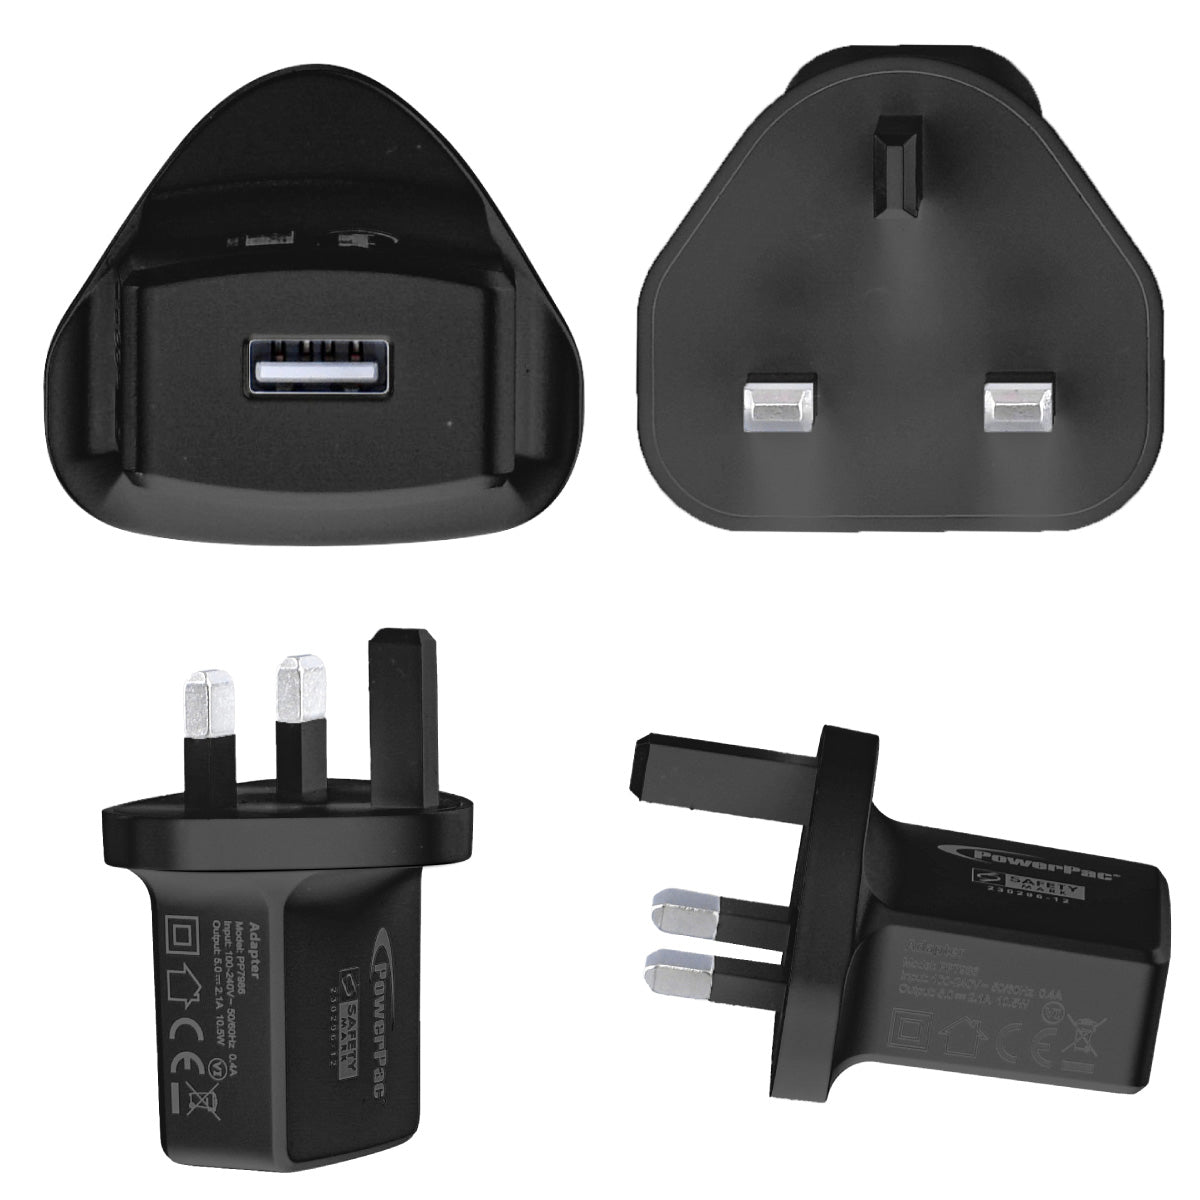 10.5W Charger Fast Charge QC3.0, PD 3.0 USB Smart Charger, TYPE A (PP7986) Black